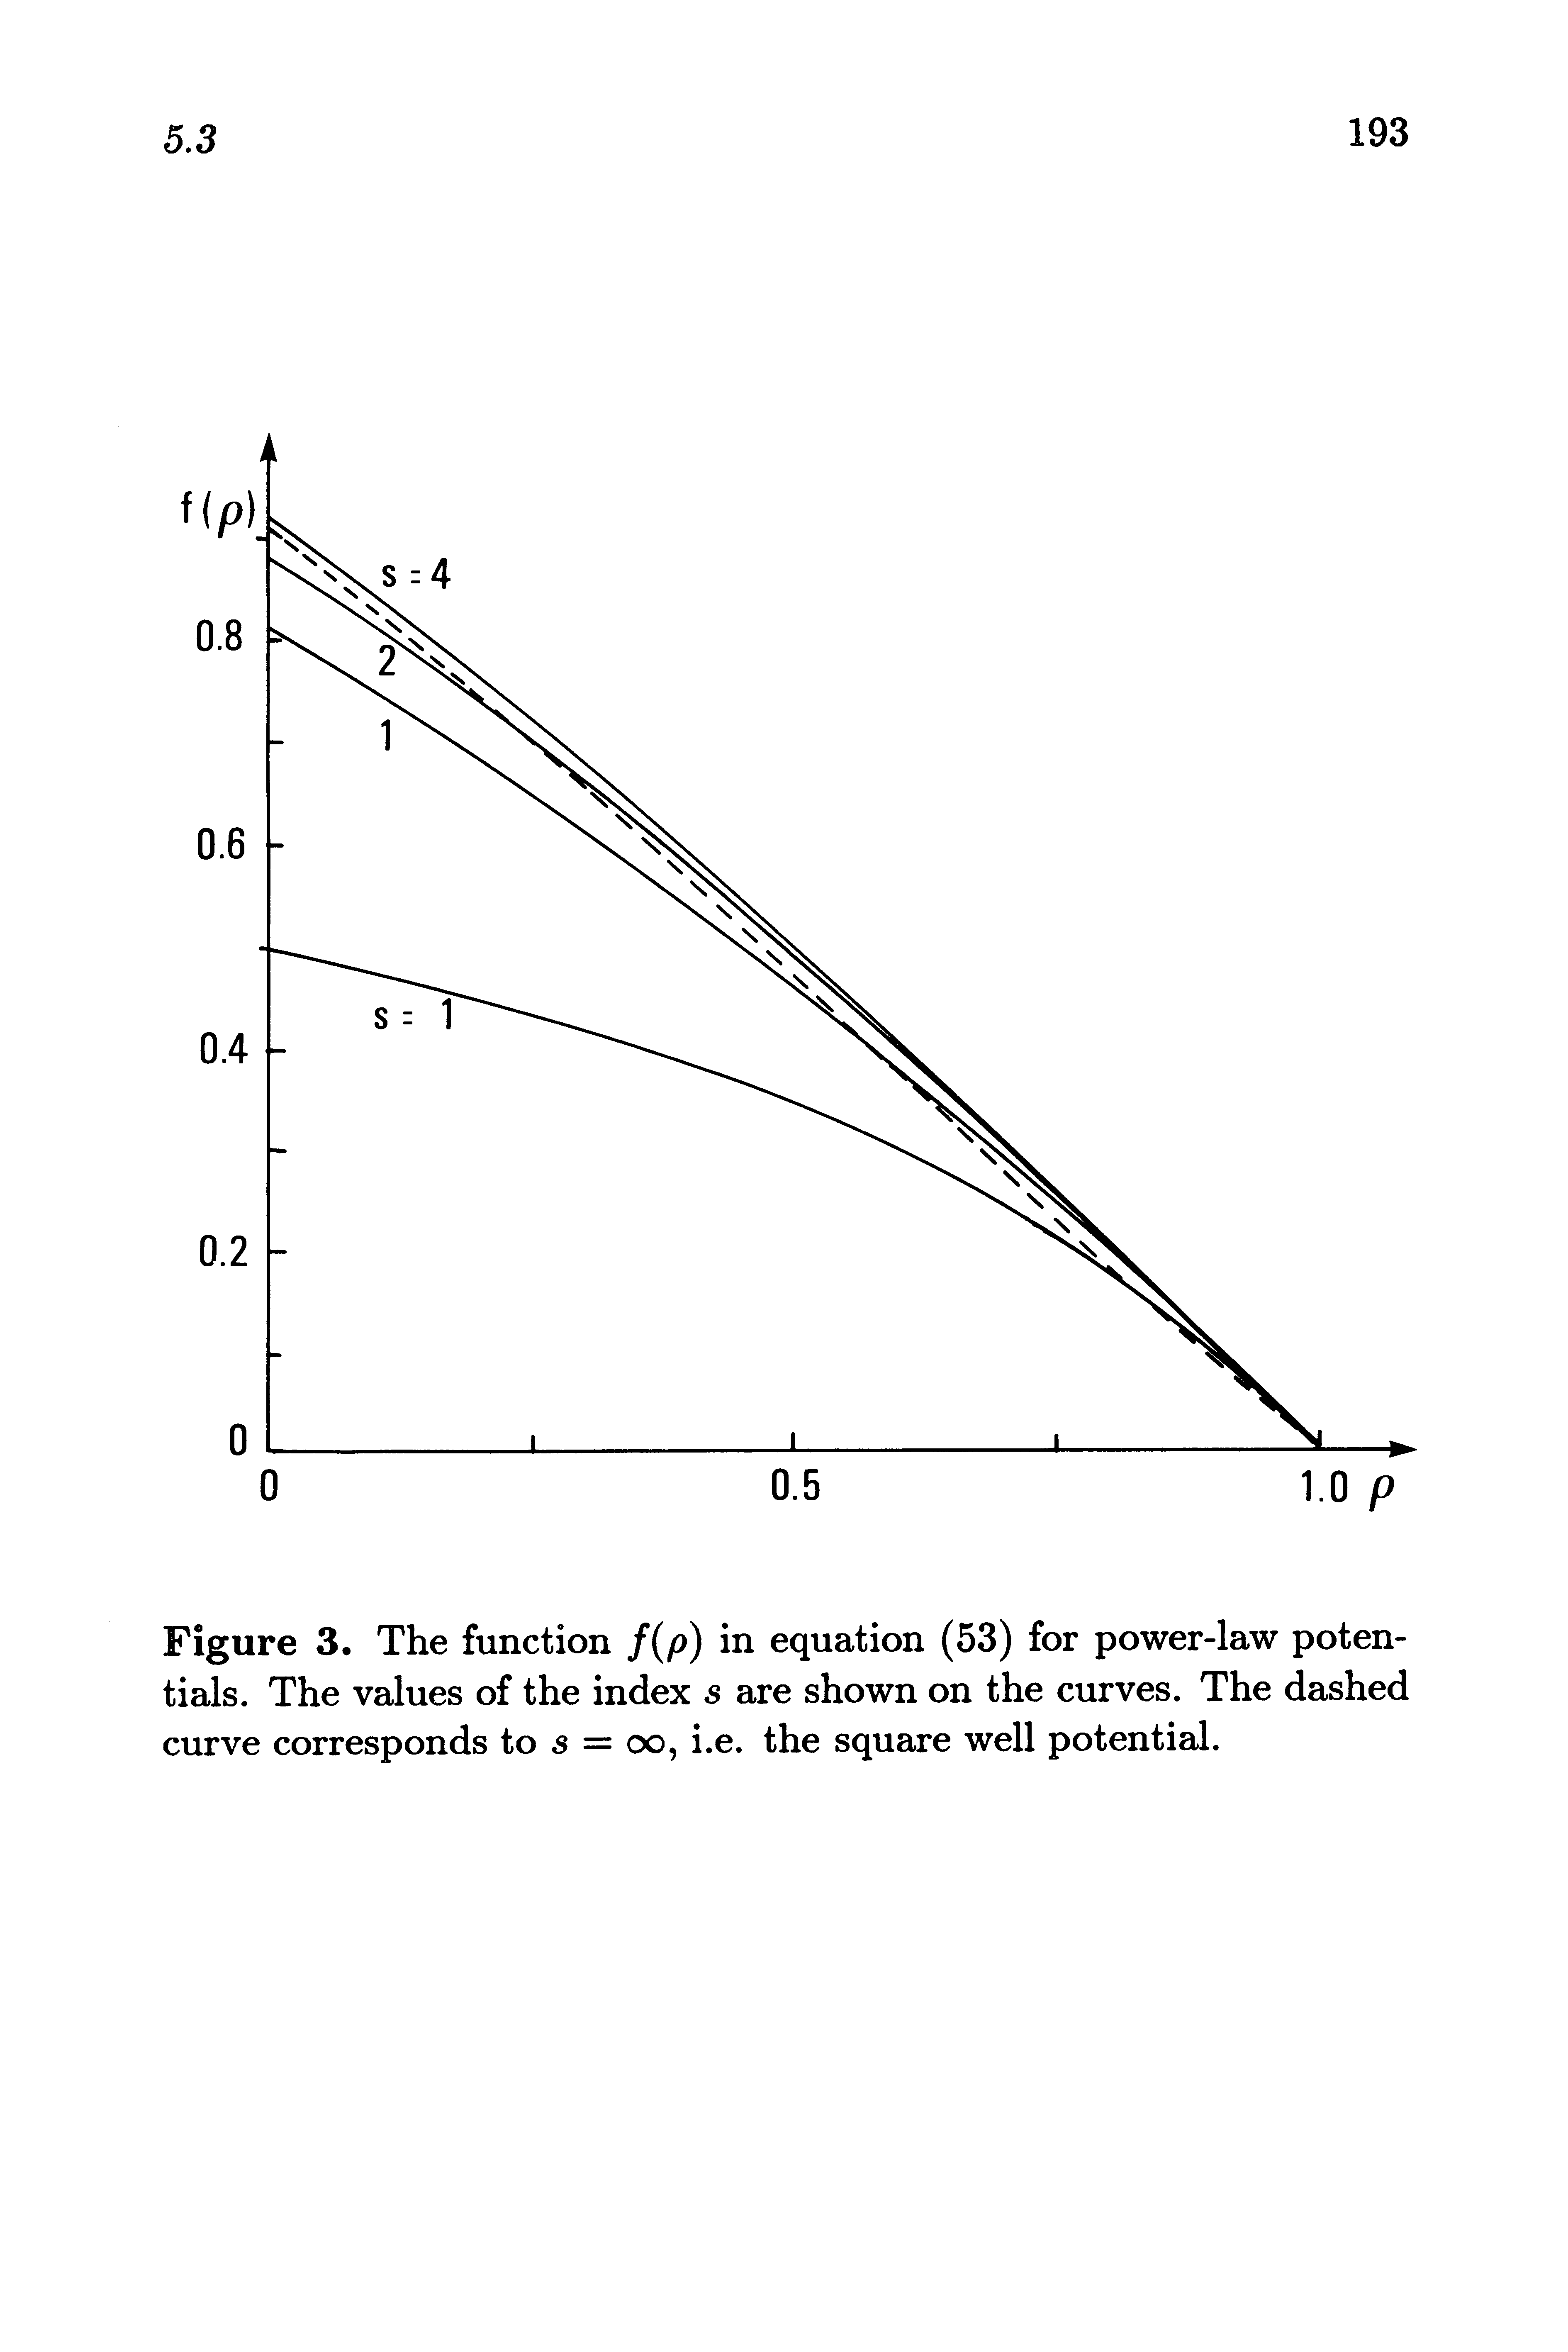 Figure 3. The function /(/>) in equation (53) for power-law potentials. The values of the index s are shown on the curves. The dashed curve corresponds to s = oo, i.e. the square well potential.